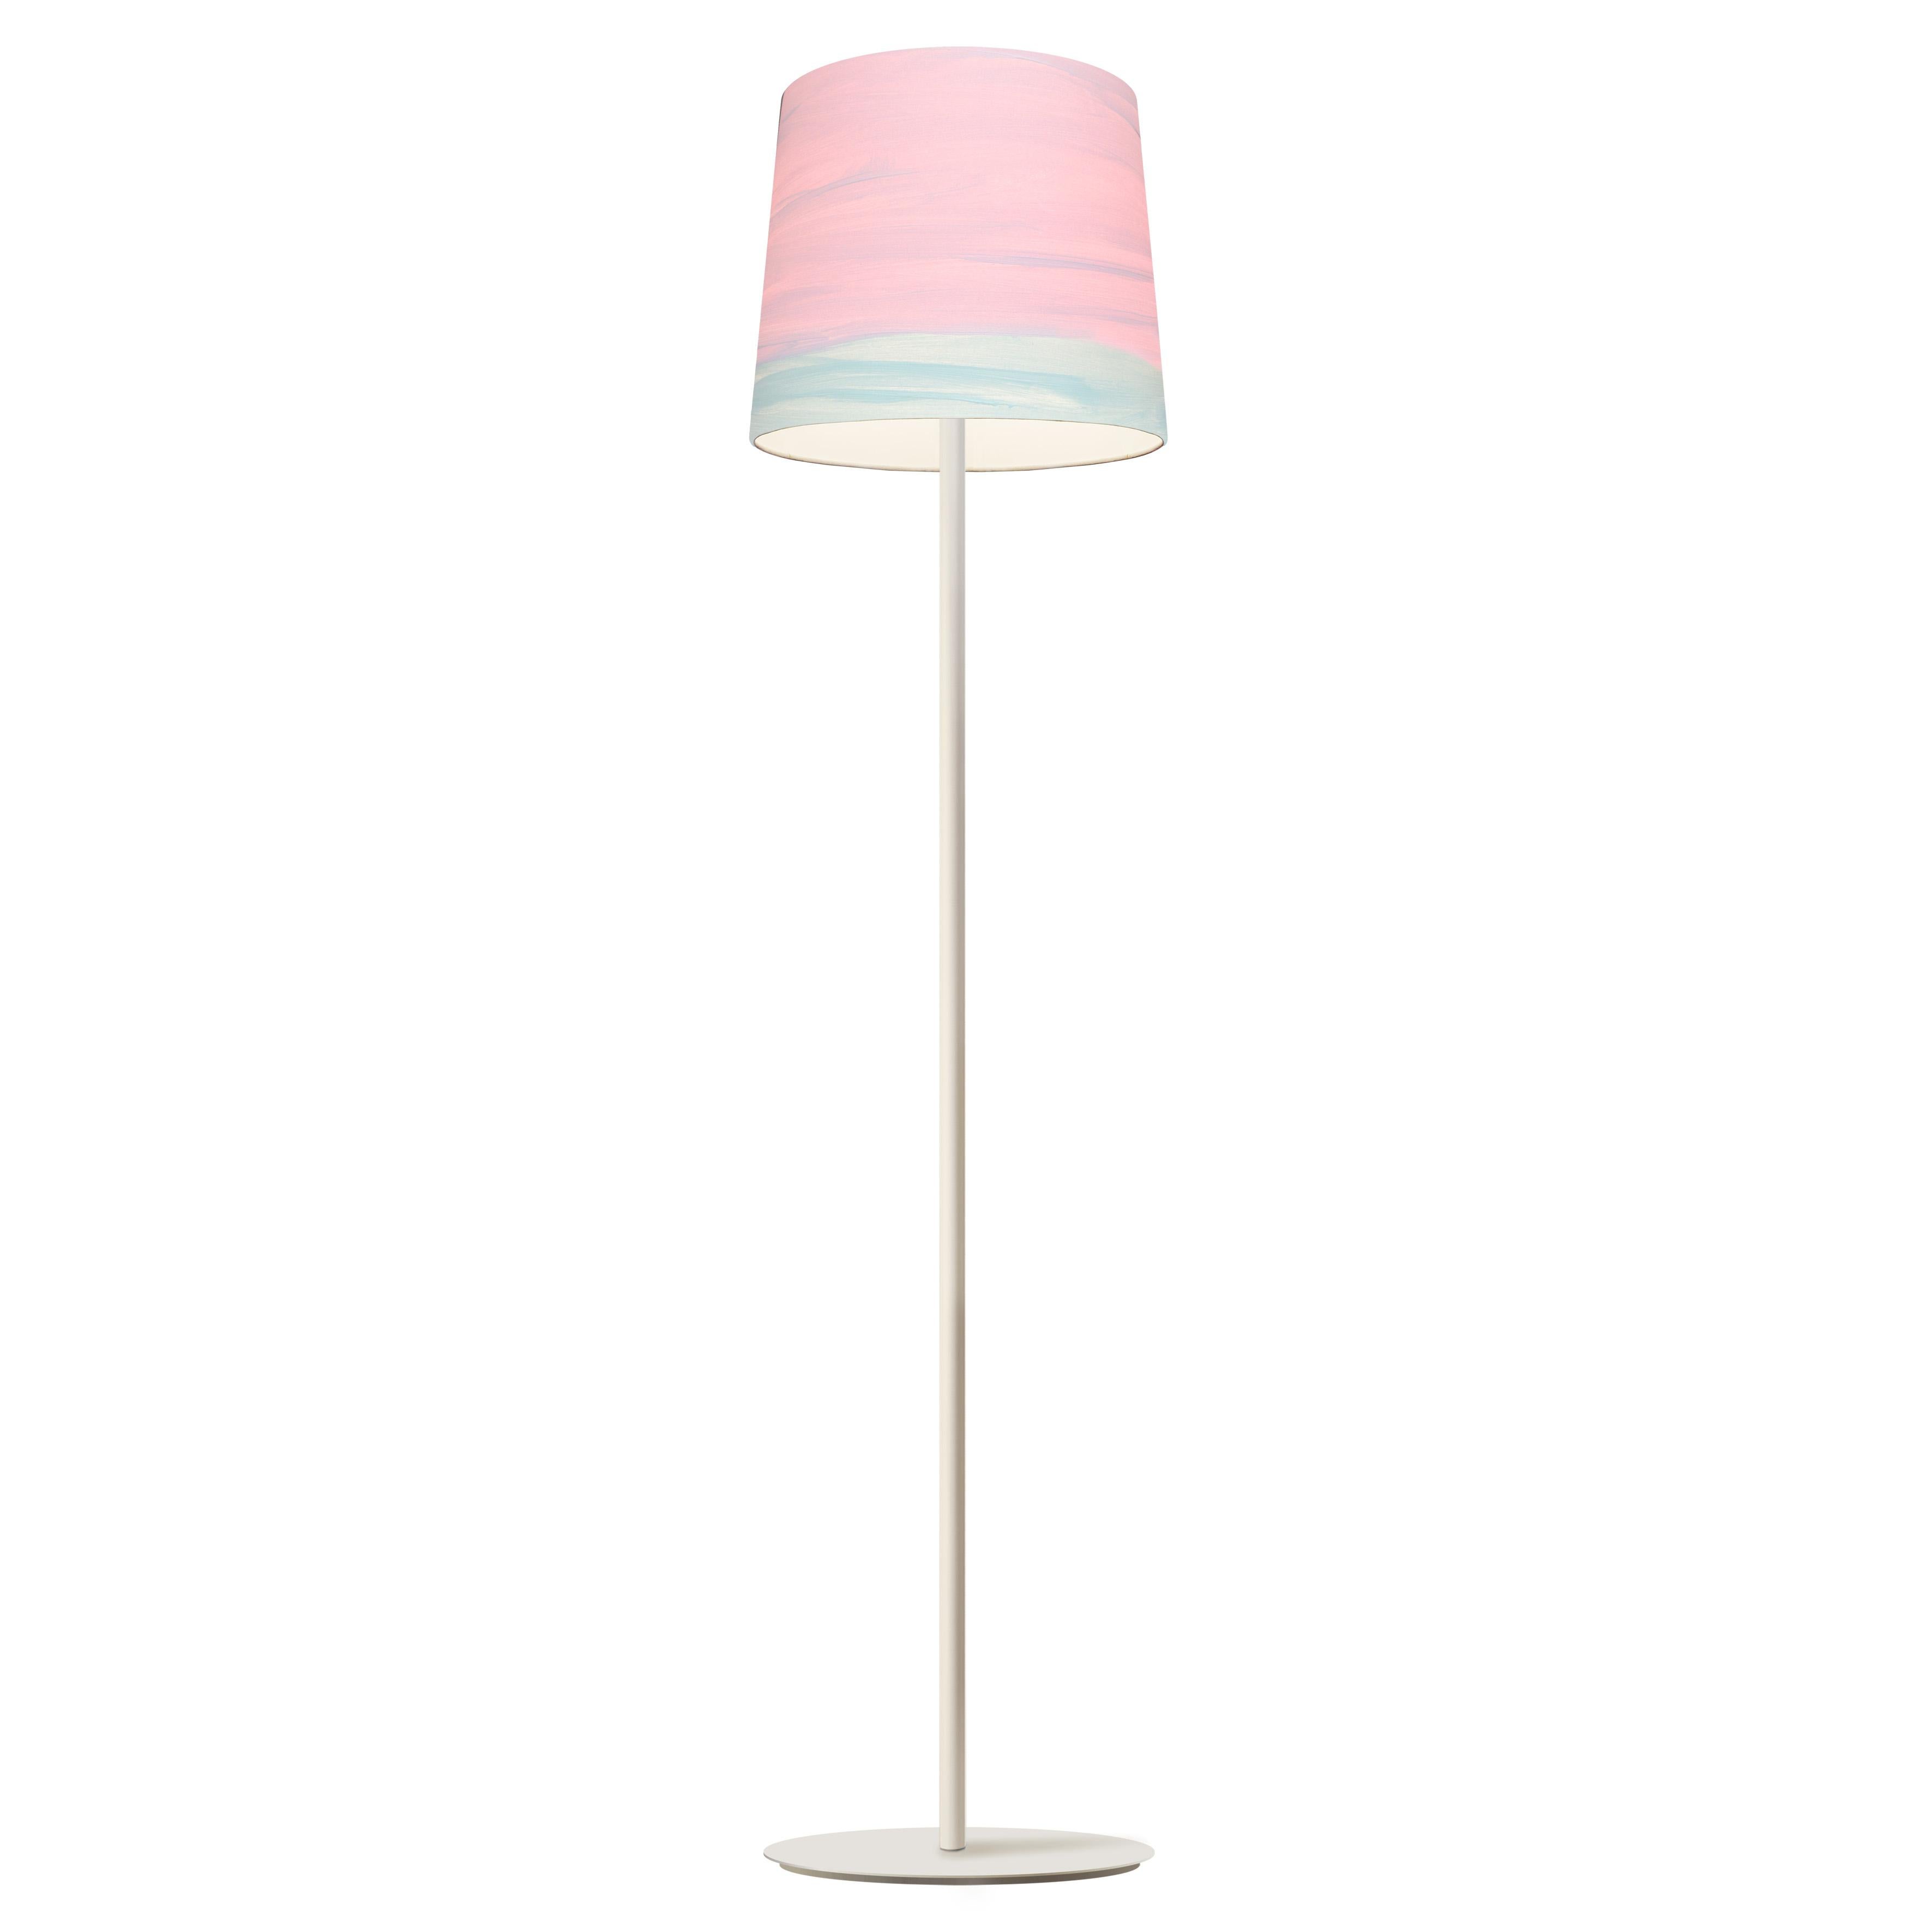 The Sisters Floor Lamp - Blossom